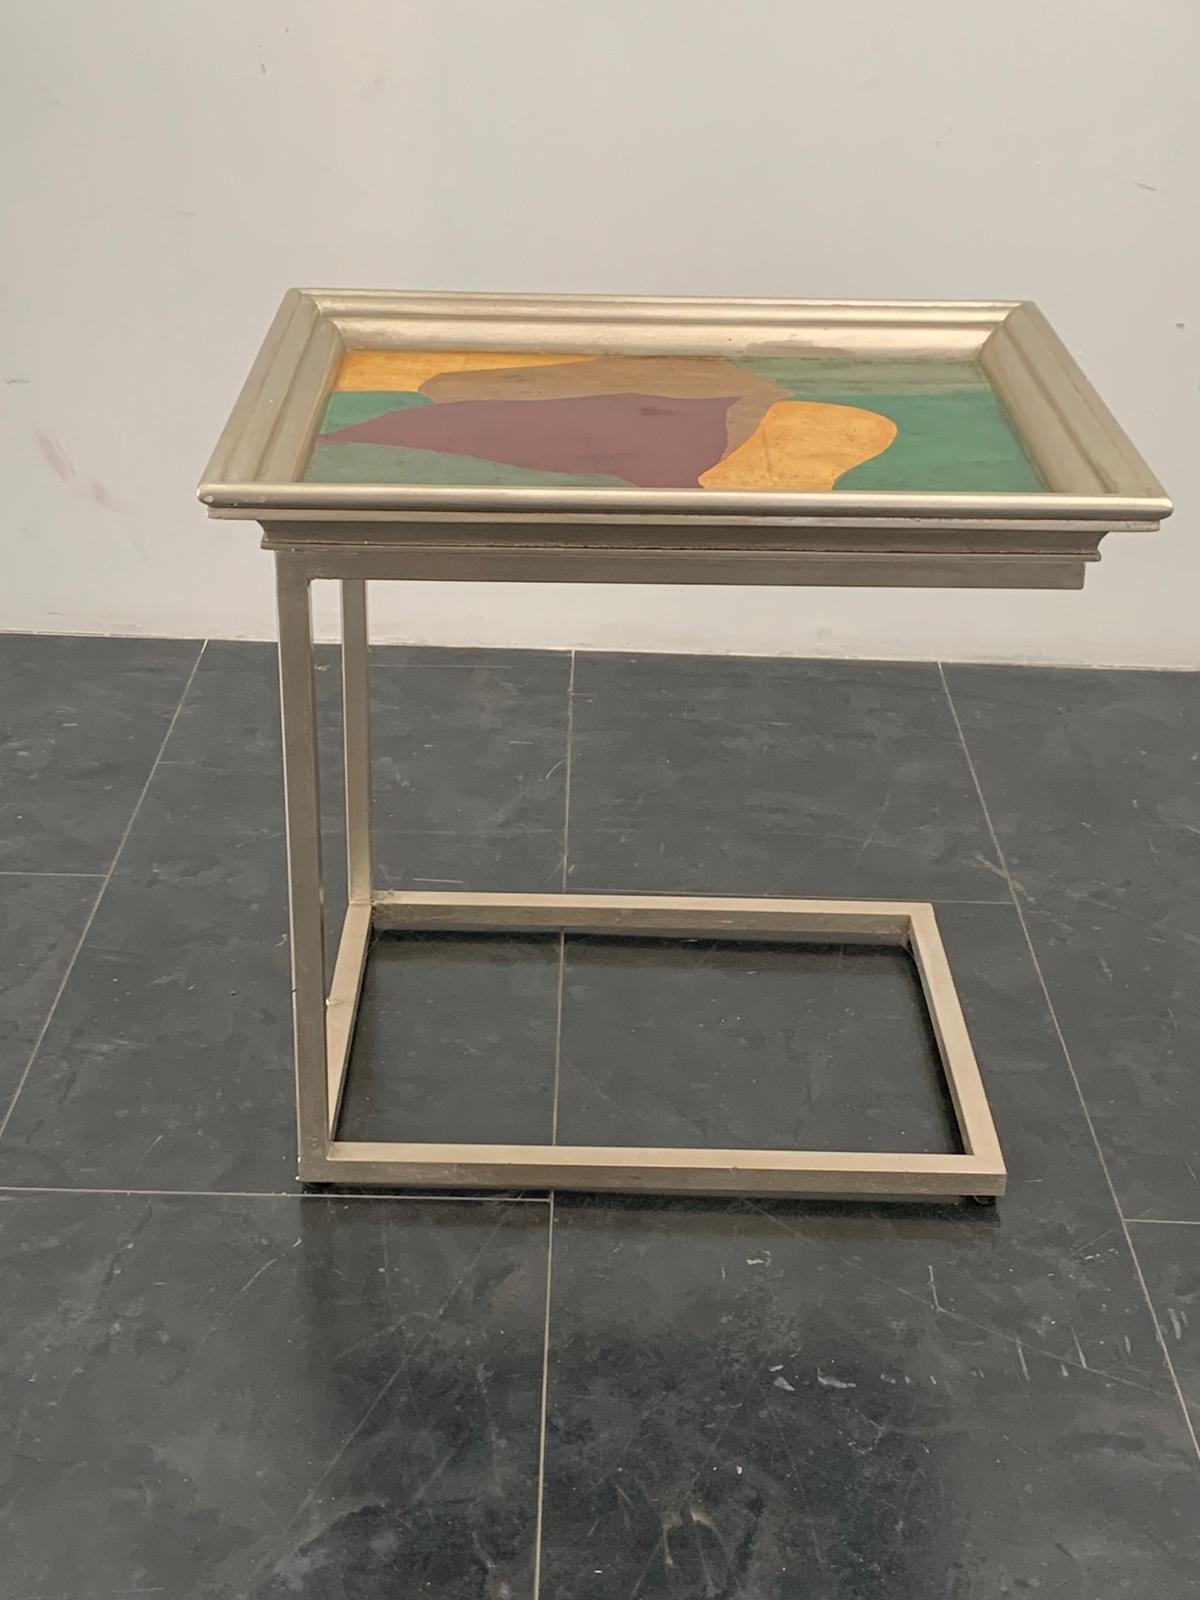 Lacquer with Thread Polychrome Metal Table, 1960s For Sale 1